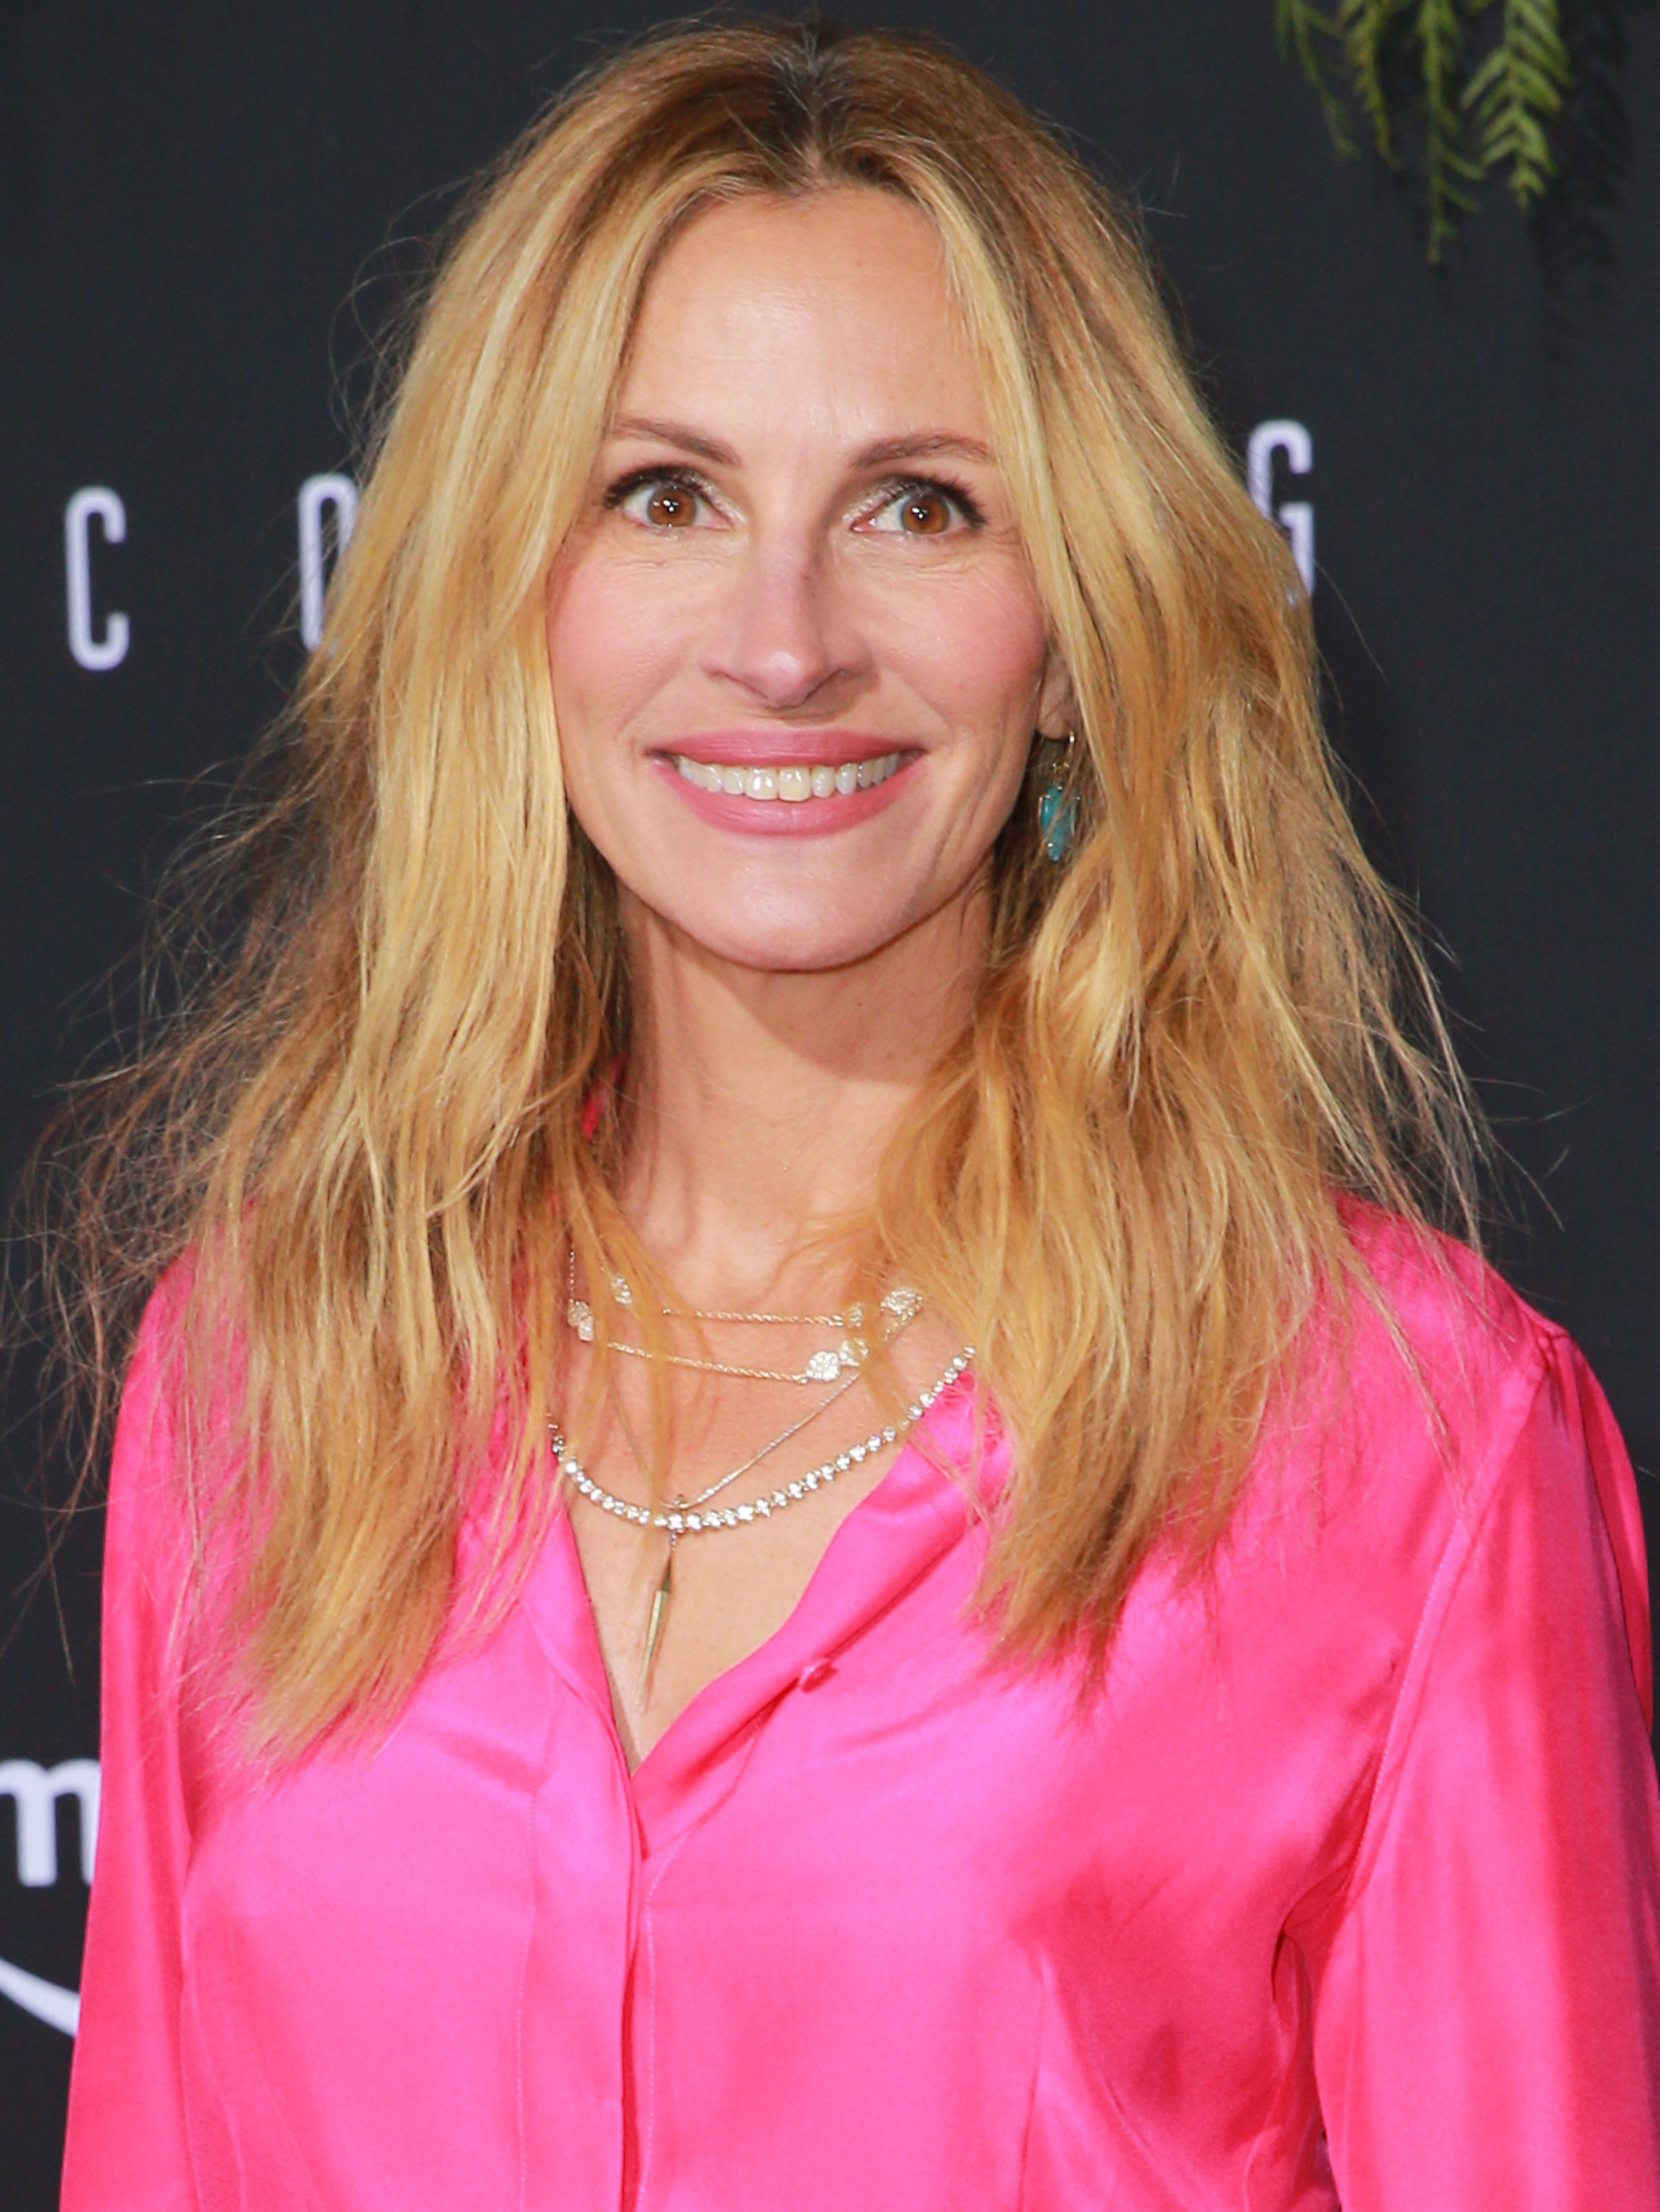 Julia Roberts (Image: Getty Images)